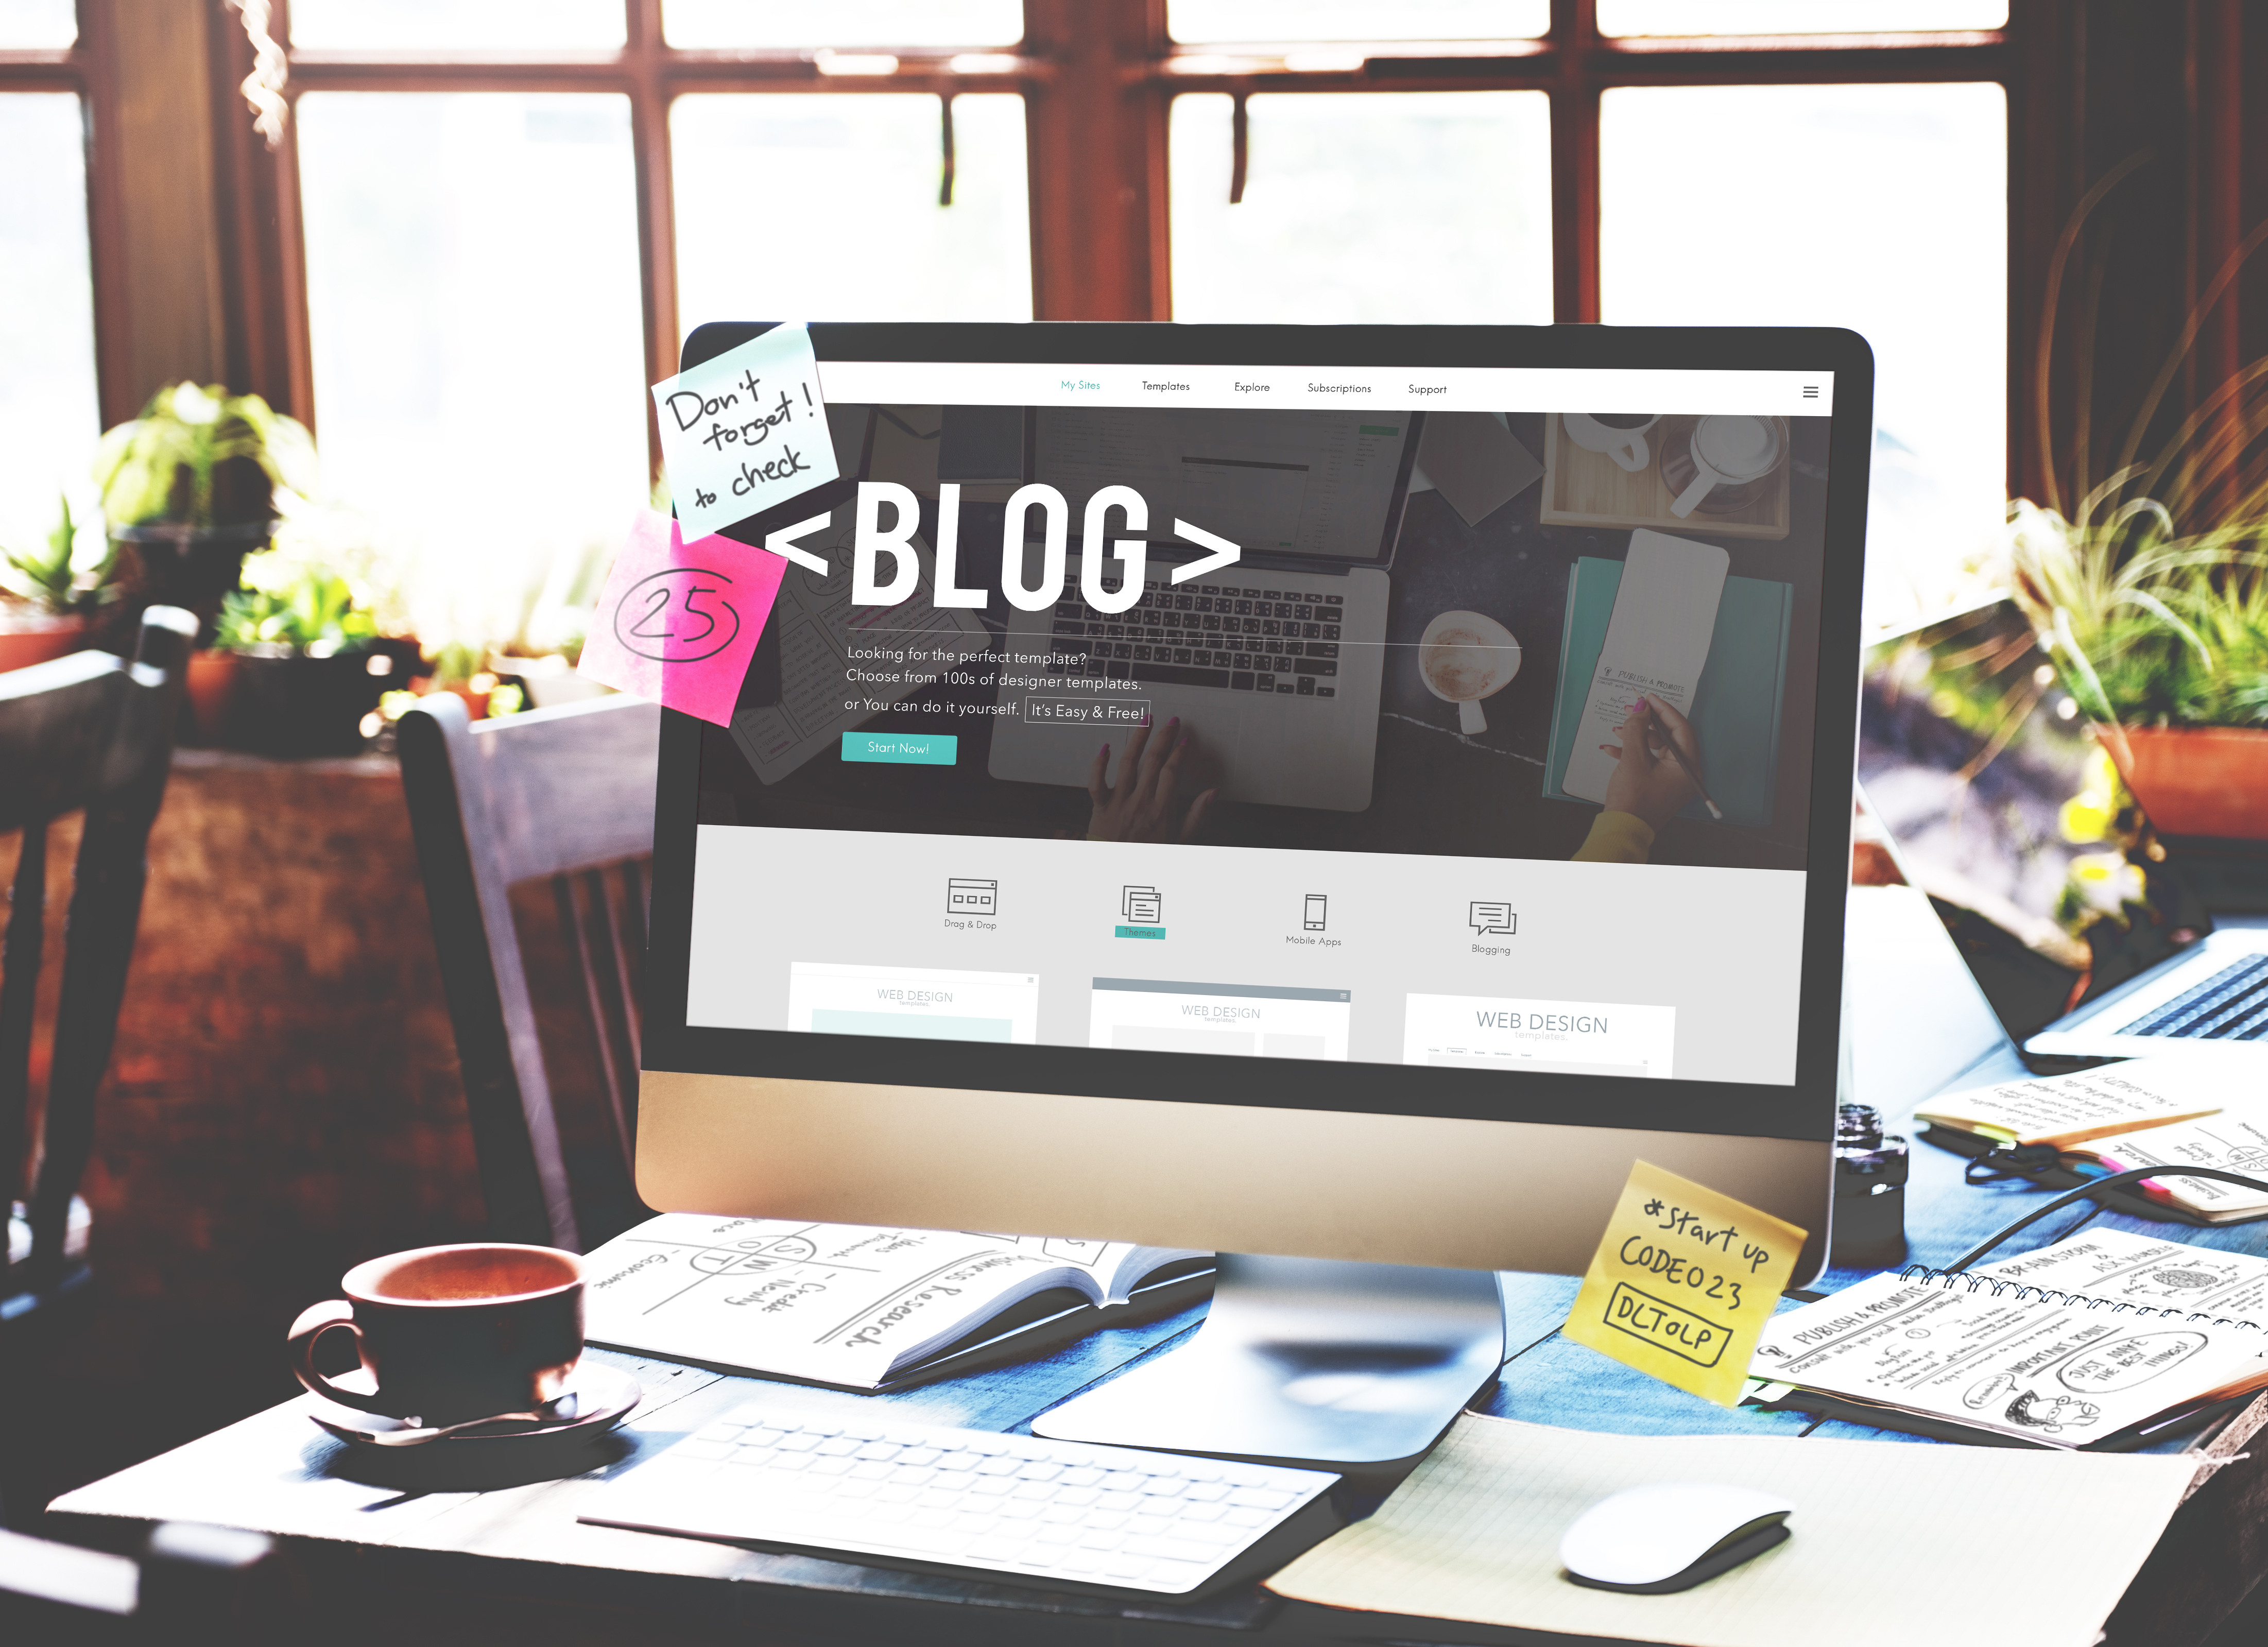 Add content to blog